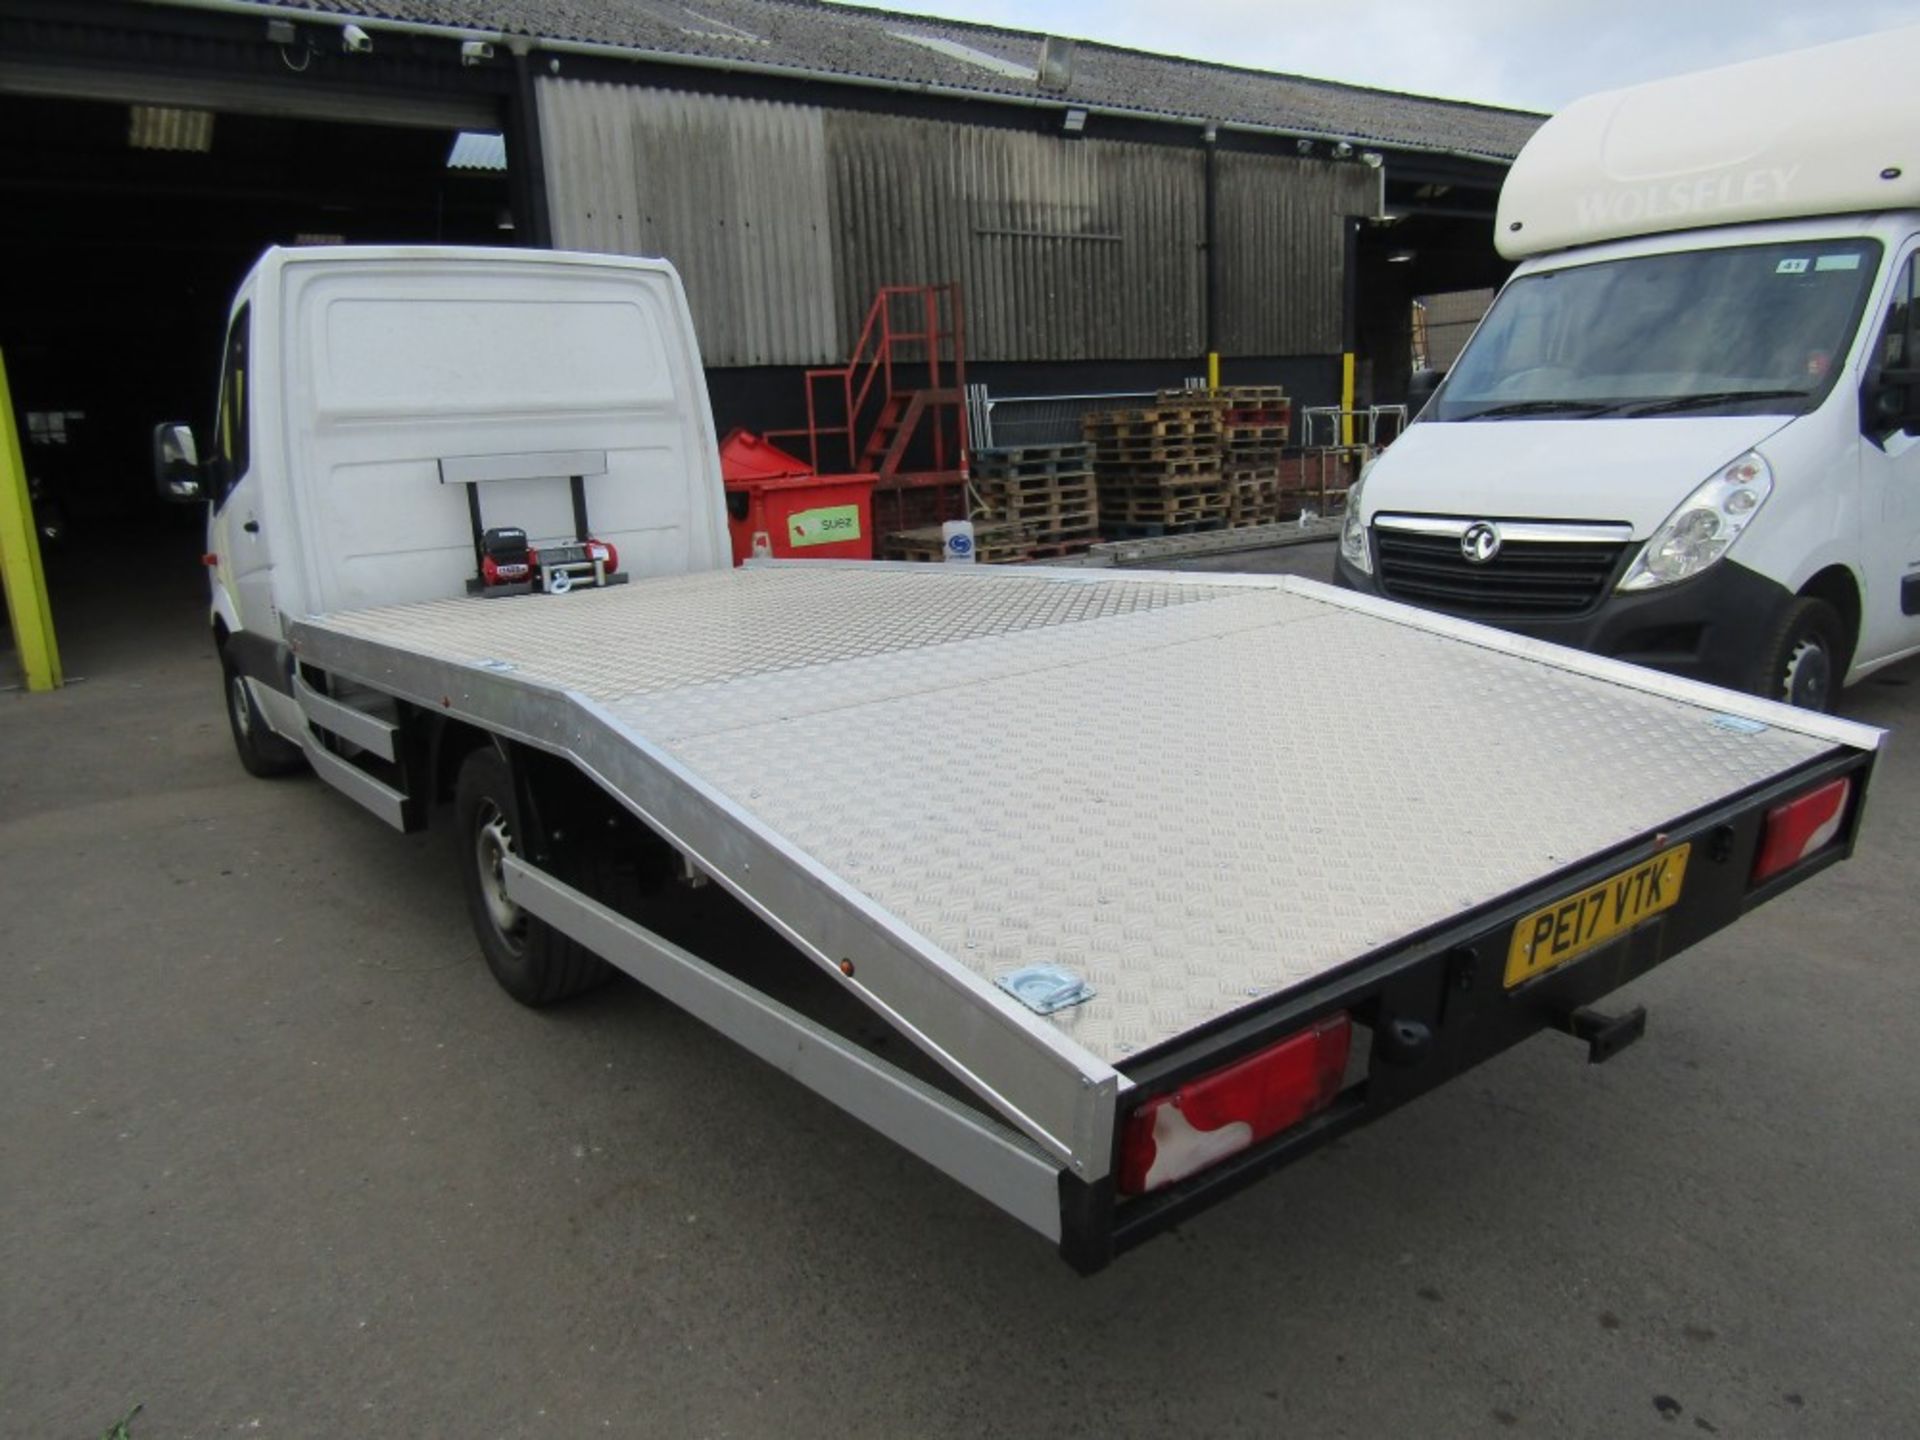 17 reg MERCEDES SPRINTER 314 CDI RECOVERY TRUCK, 1ST REG 07/17, TEST 07/22, 176296M, V5 HERE, 1 OWNE - Image 3 of 6